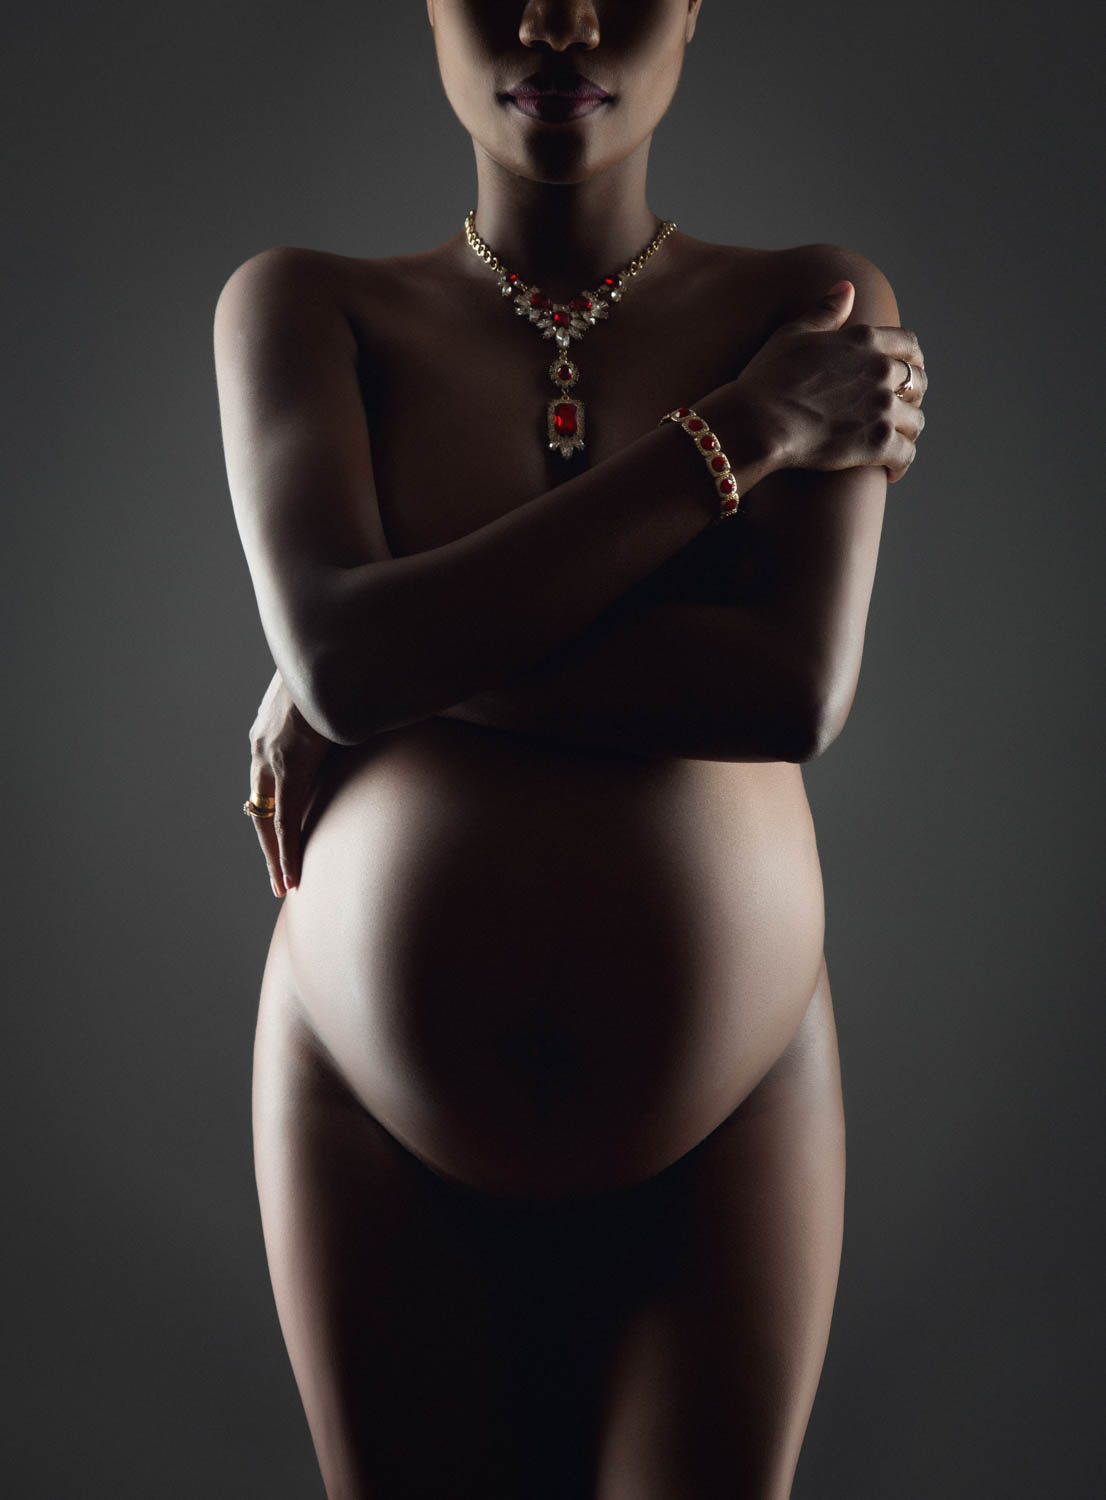 Fine-art nude maternity photography in NYC, artistic and timeless pregnancy portraits, photos, NY, Best NYC maternity photographer